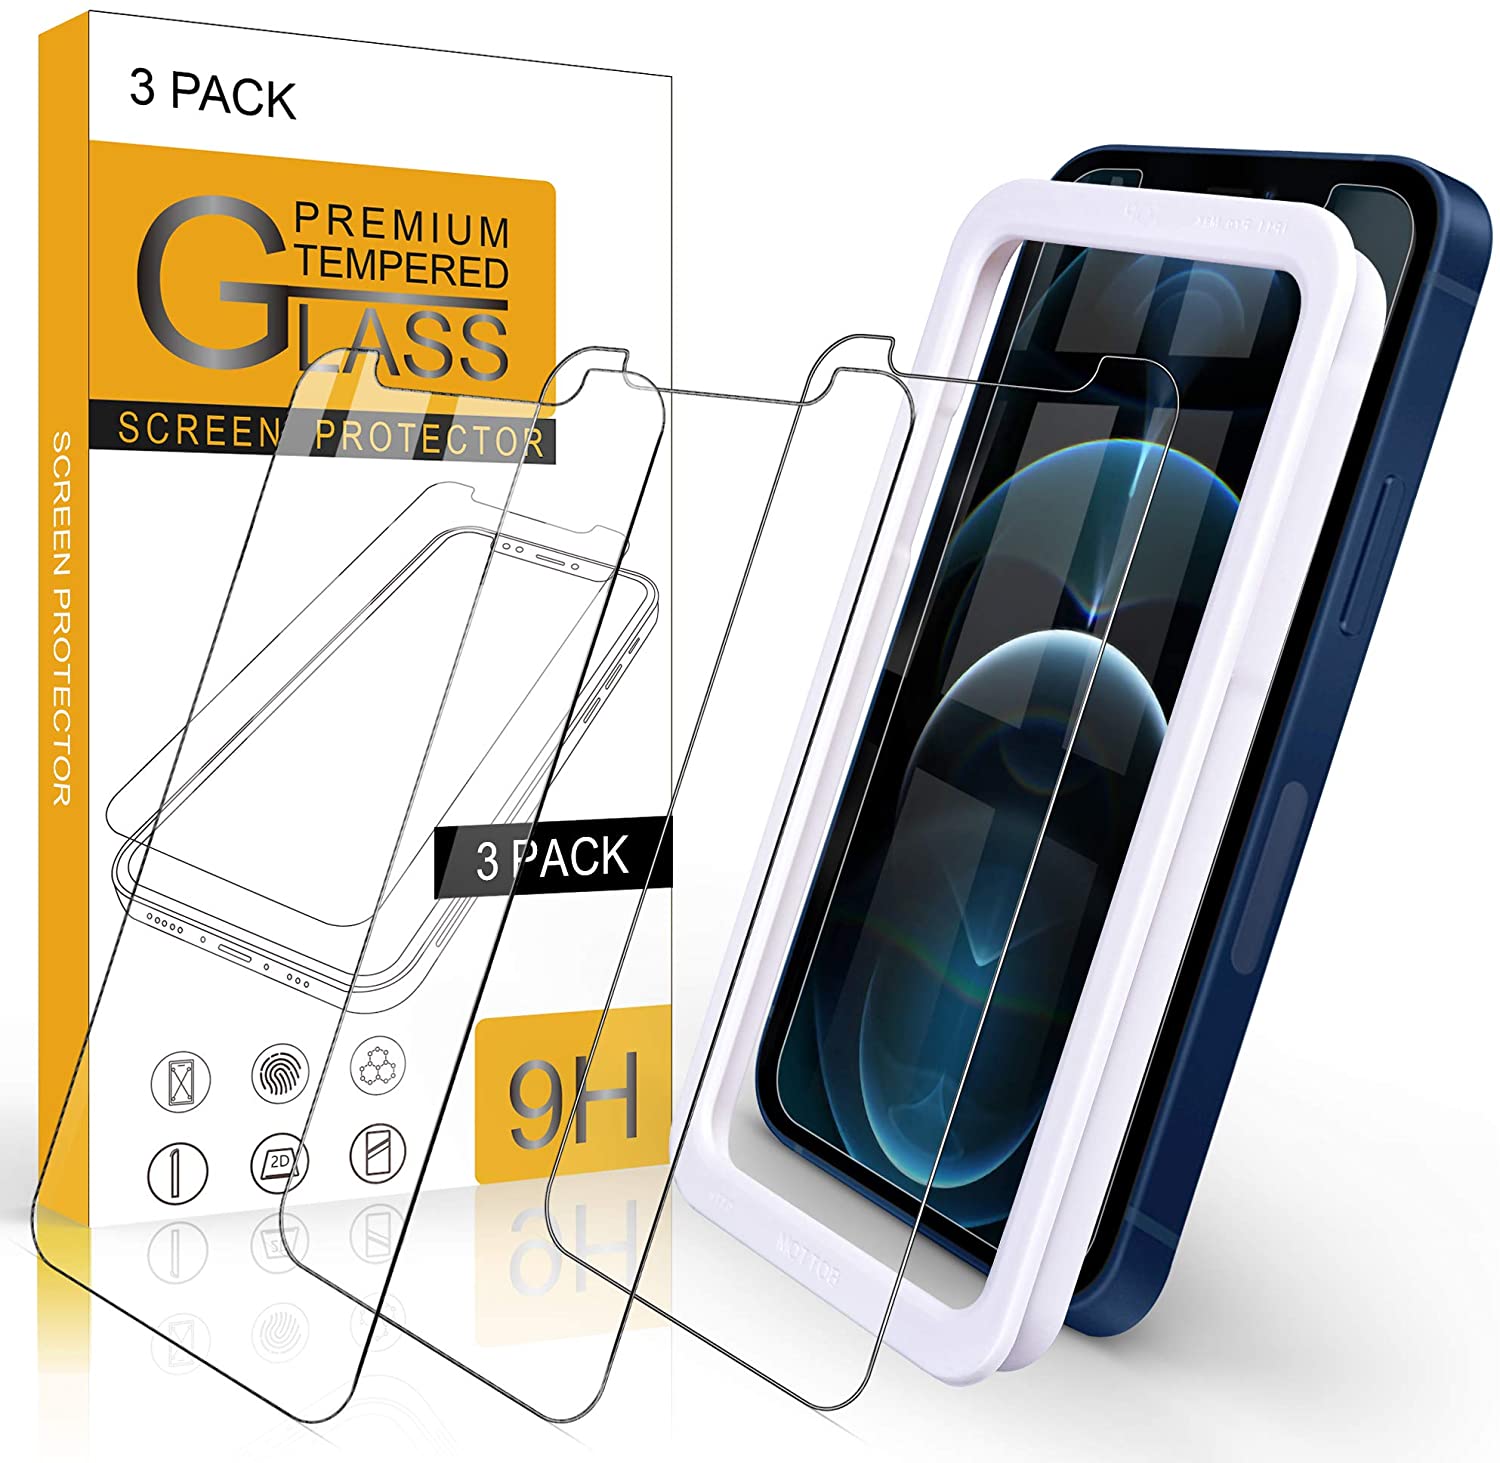 Tempered Glass Camera Screen Protector Film for iPhone 12 Pro Max 6.7 inch-TVC-Mall.com